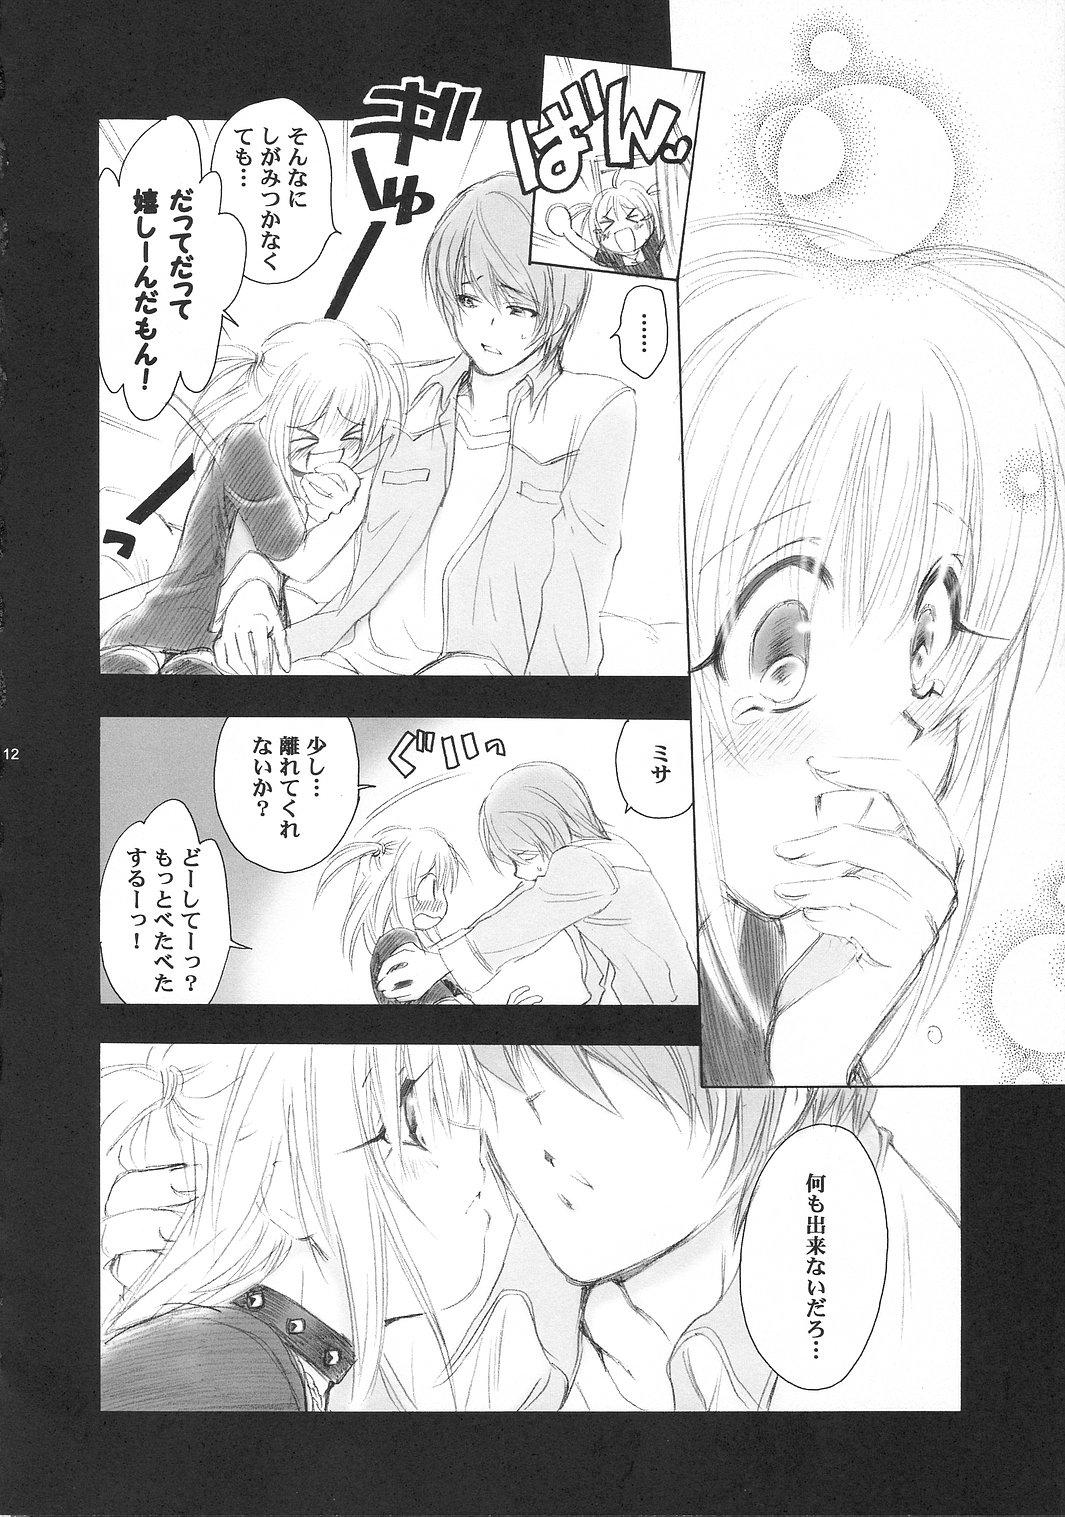 Squirting MISA MISSA - Death note Sapphicerotica - Page 11